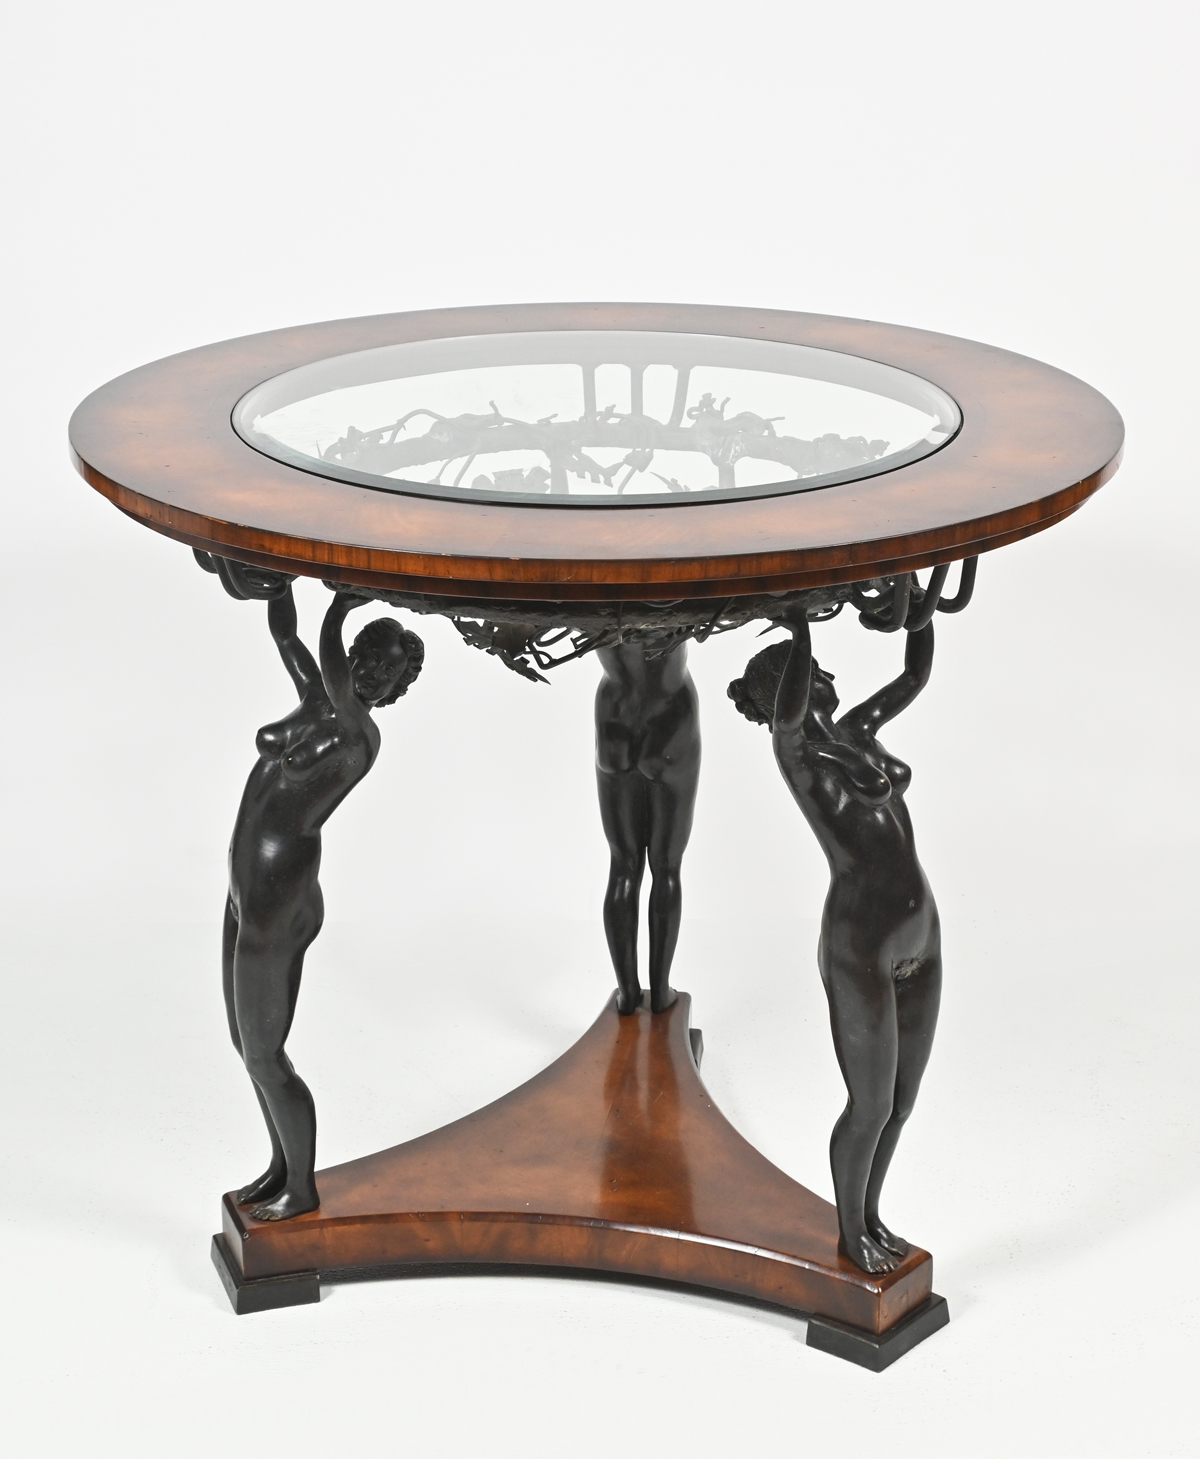 GLASS WOOD TABLE WITH BRONZE 30a05d